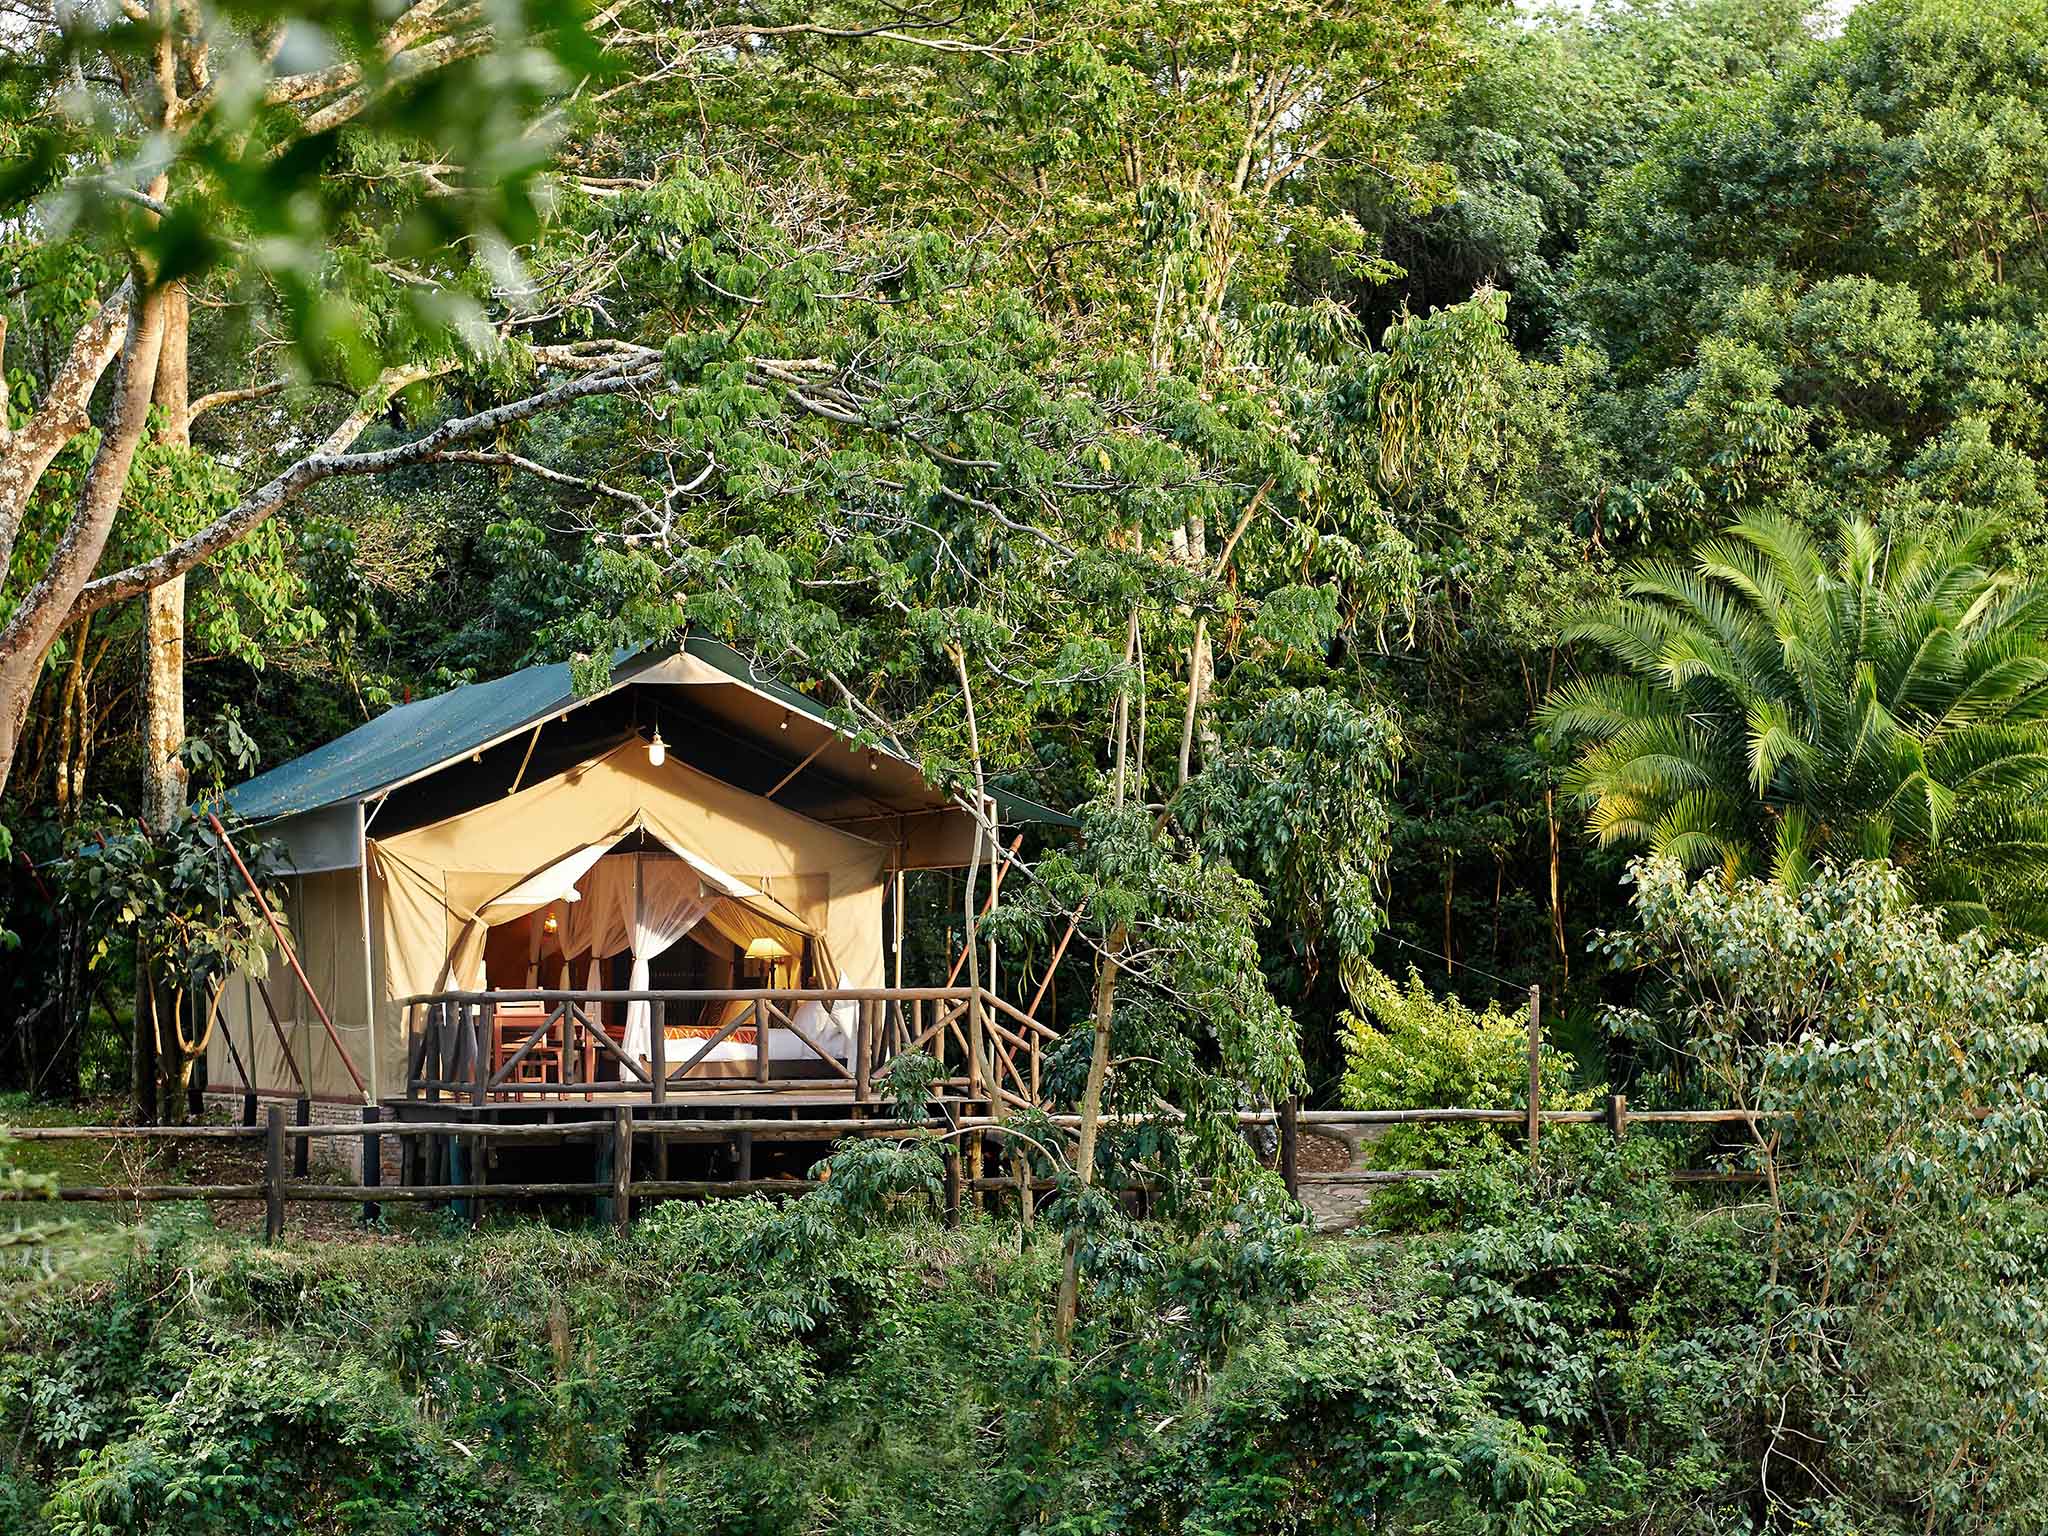 A Safari Camp for your Wildest Dreams?